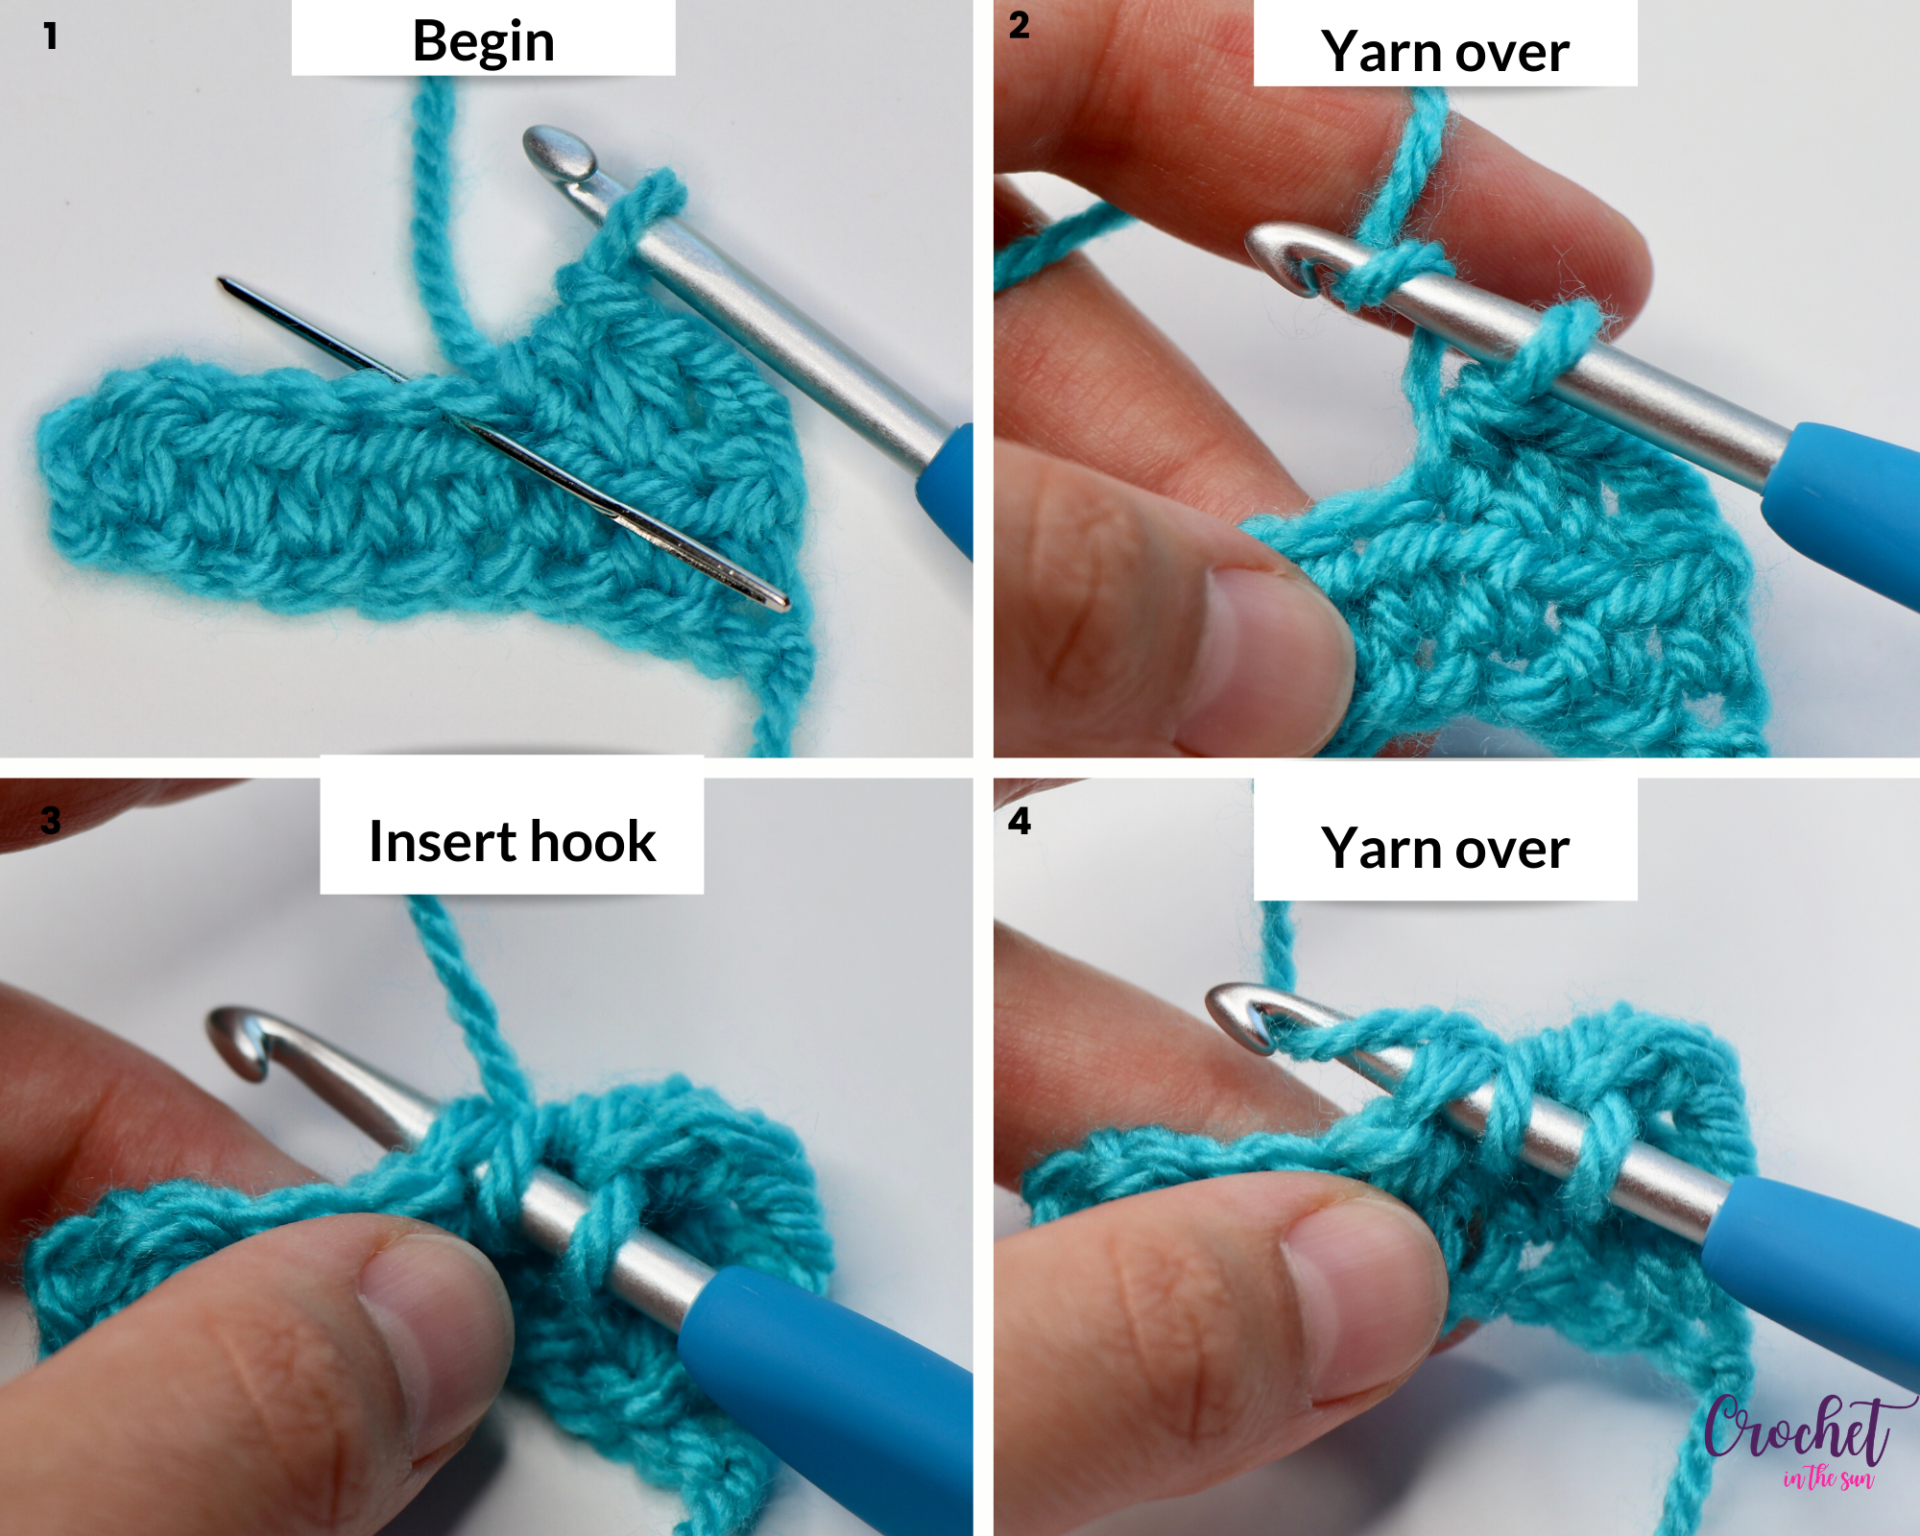 Crochet Inspiration - Crochet Patterns, How to, Stitches, Guides and more